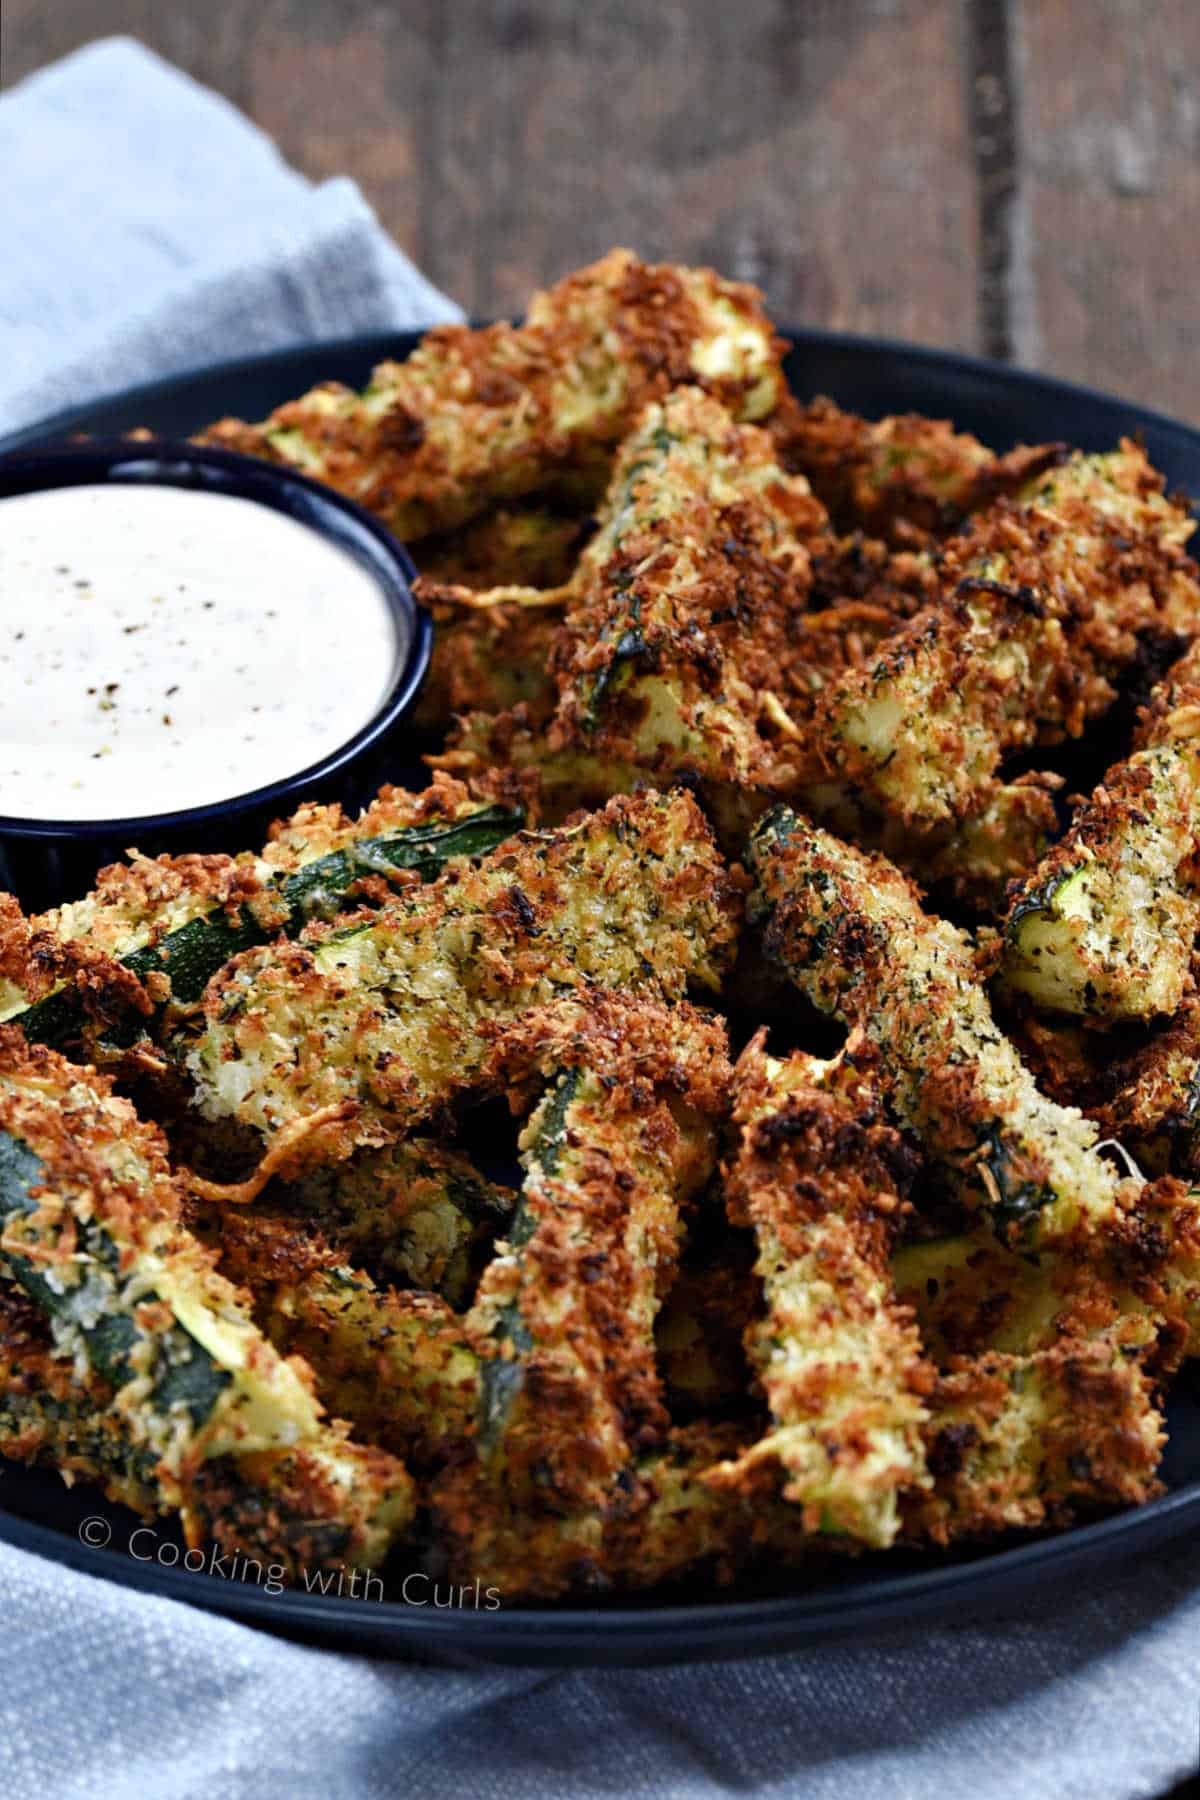 A plate filled with crispy zucchini fries with a small bowl of ranch dressing.